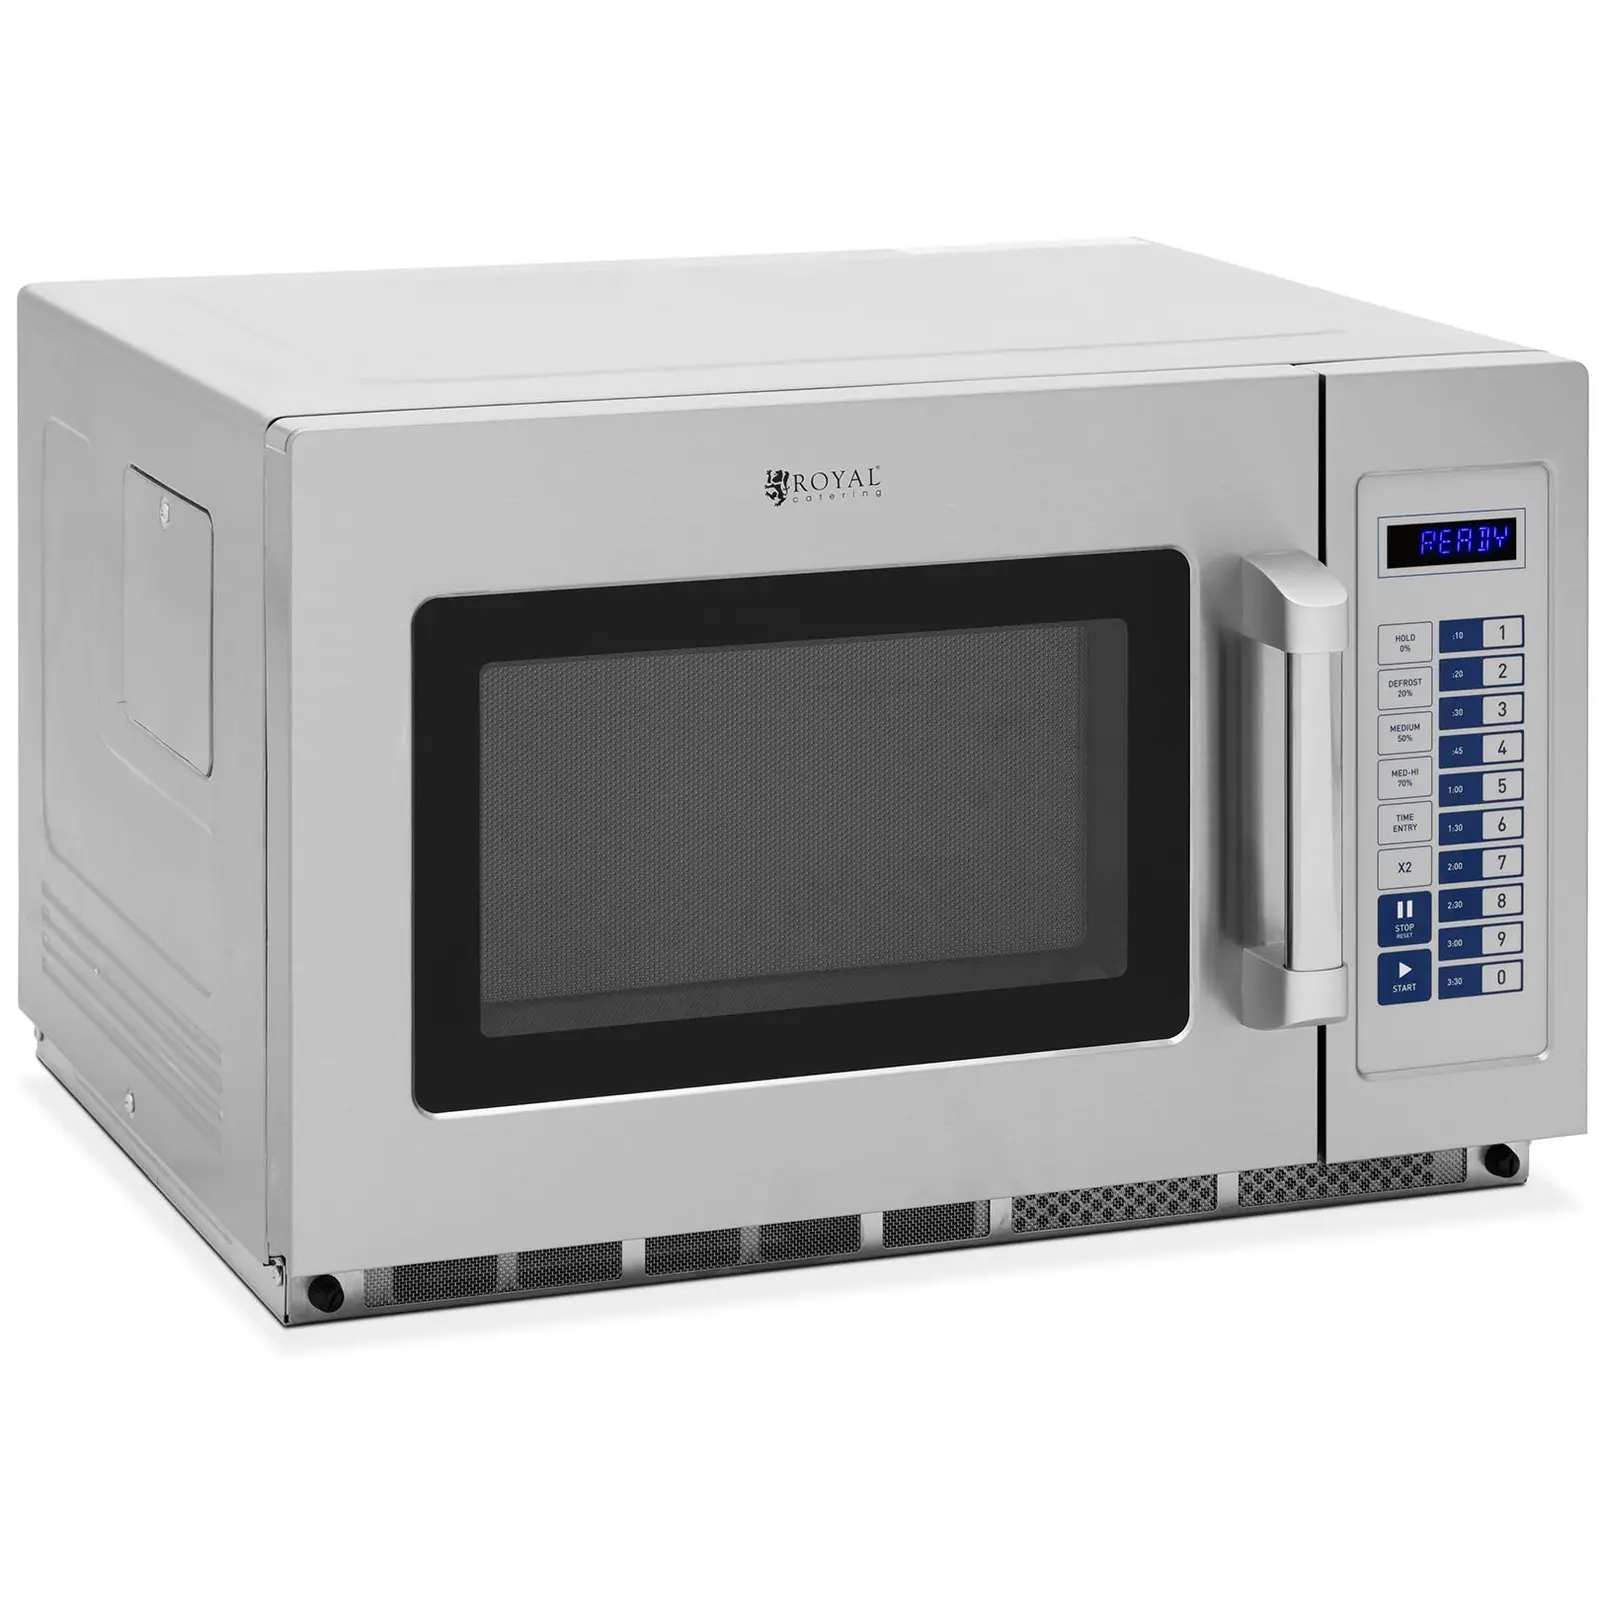 Microondas industrial - 3200 W - 34 L - Royal Catering